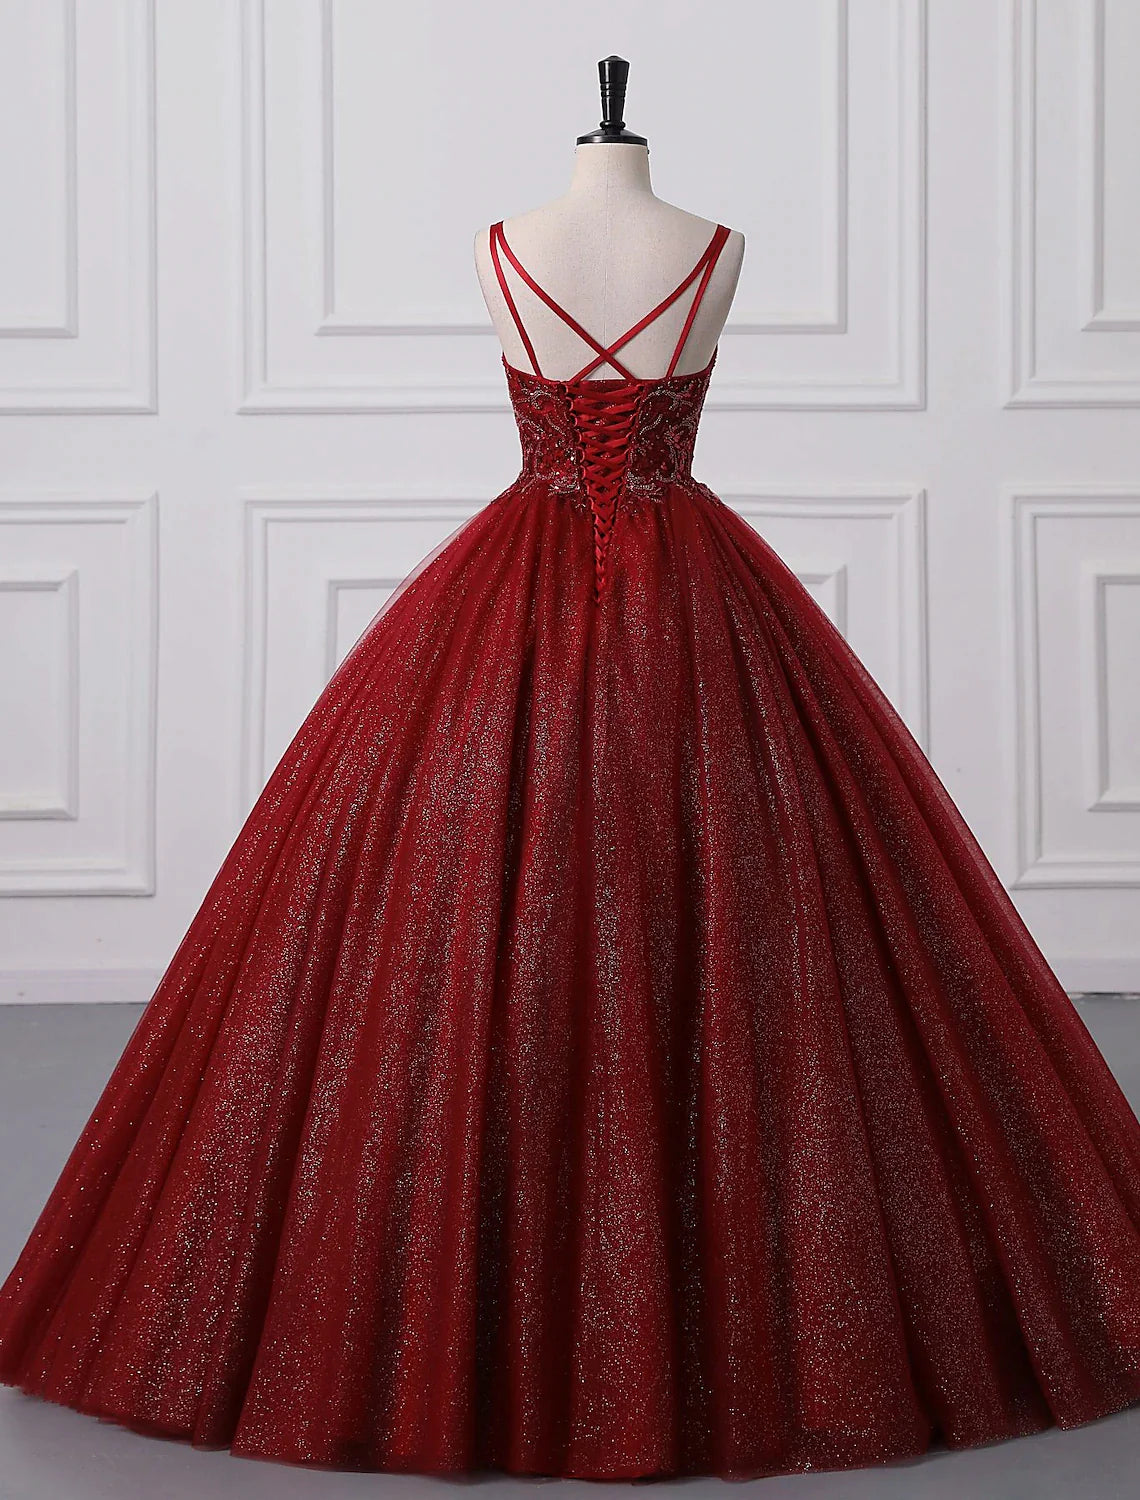 Ball Gown Prom Dresses Princess Dress Graduation Floor Length Sleeveless Spaghetti Strap Lace with Beading Appliques